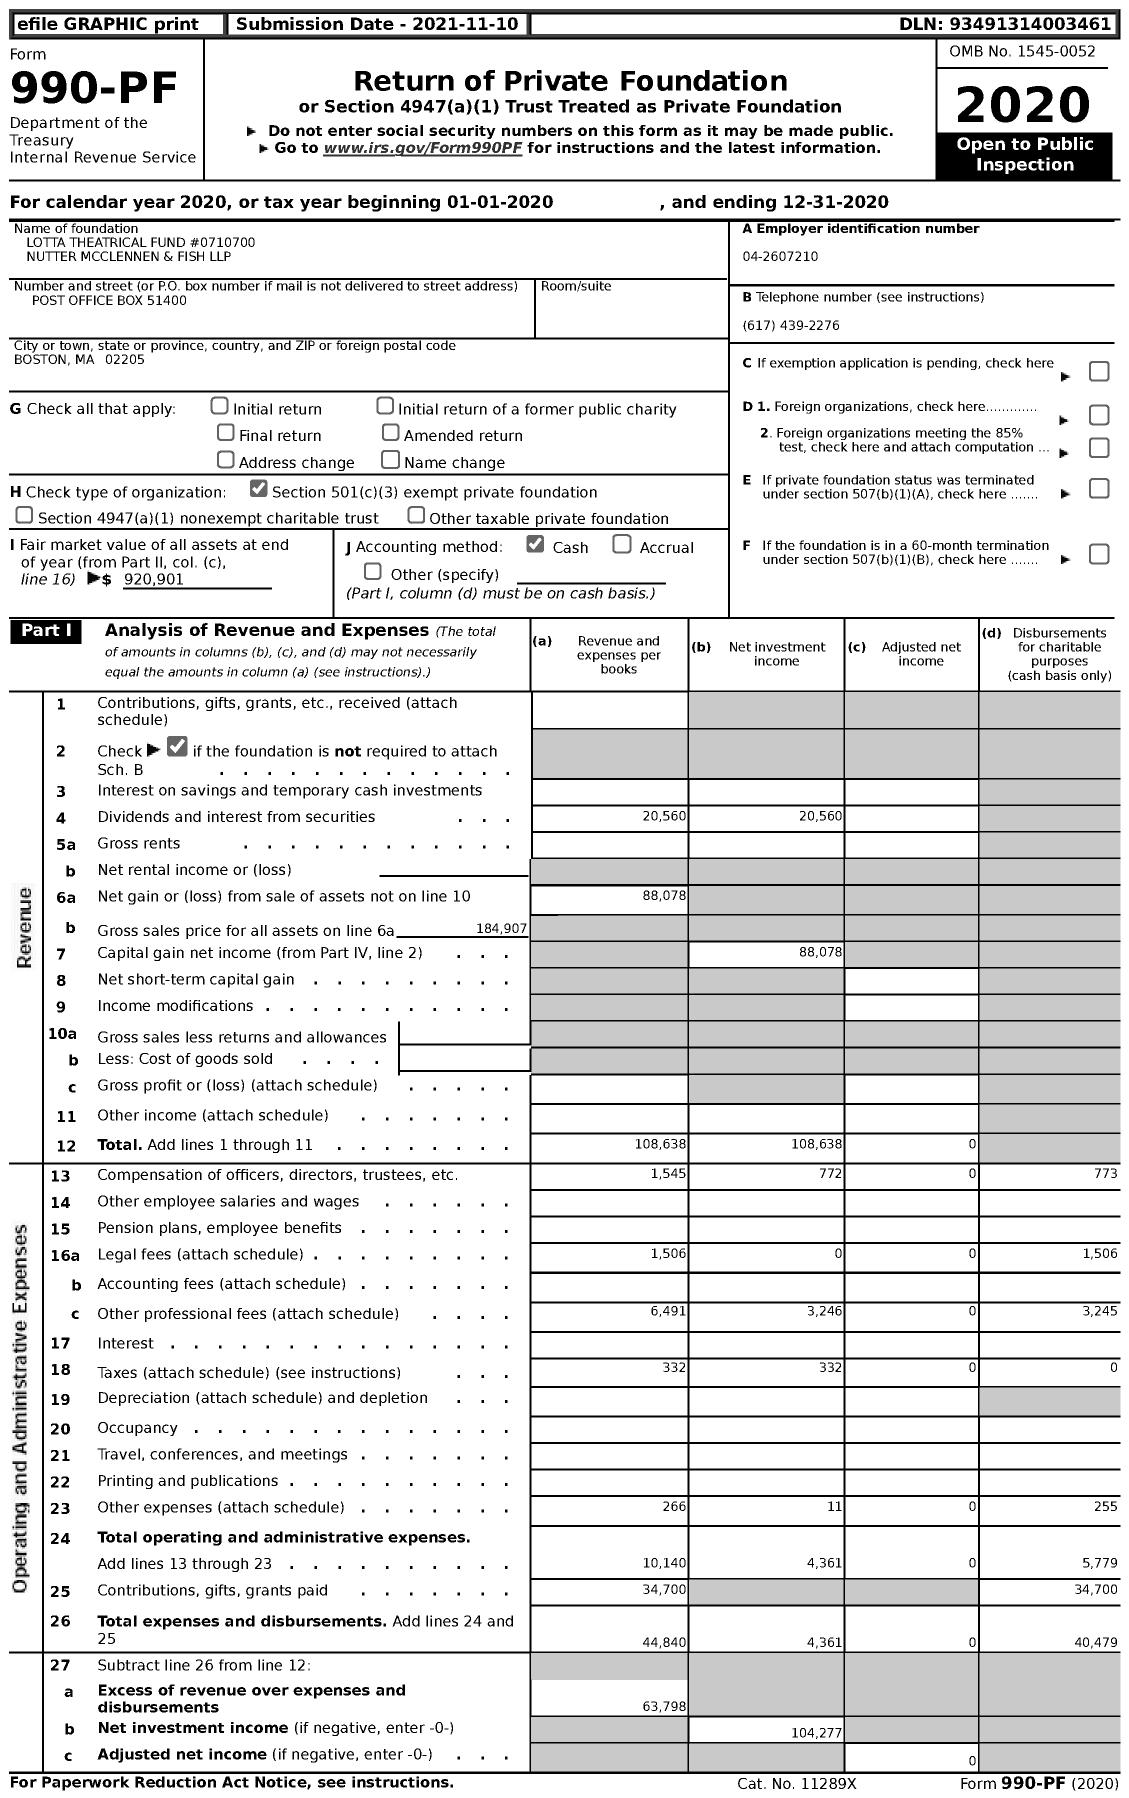 Image of first page of 2020 Form 990PF for Lotta Theatrical Fund #0710700 Nutter Mcclennen and Fish LLP